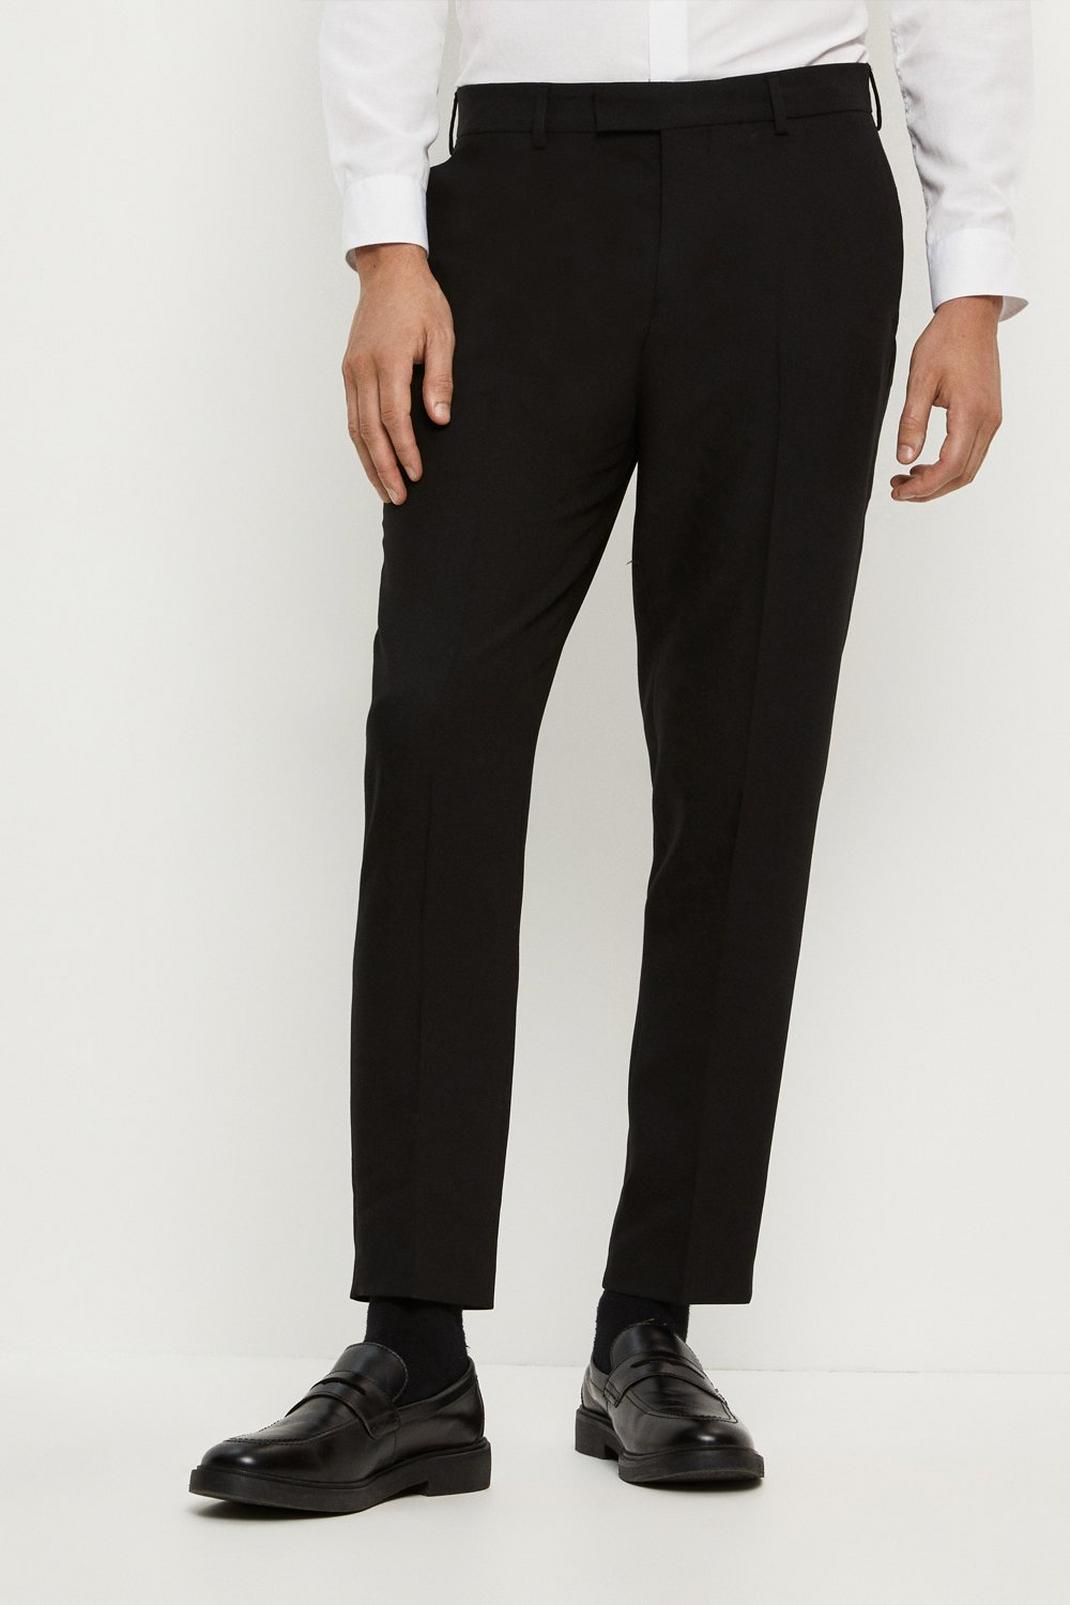 105 Skinny Fit Black Tuxedo Trousers image number 1